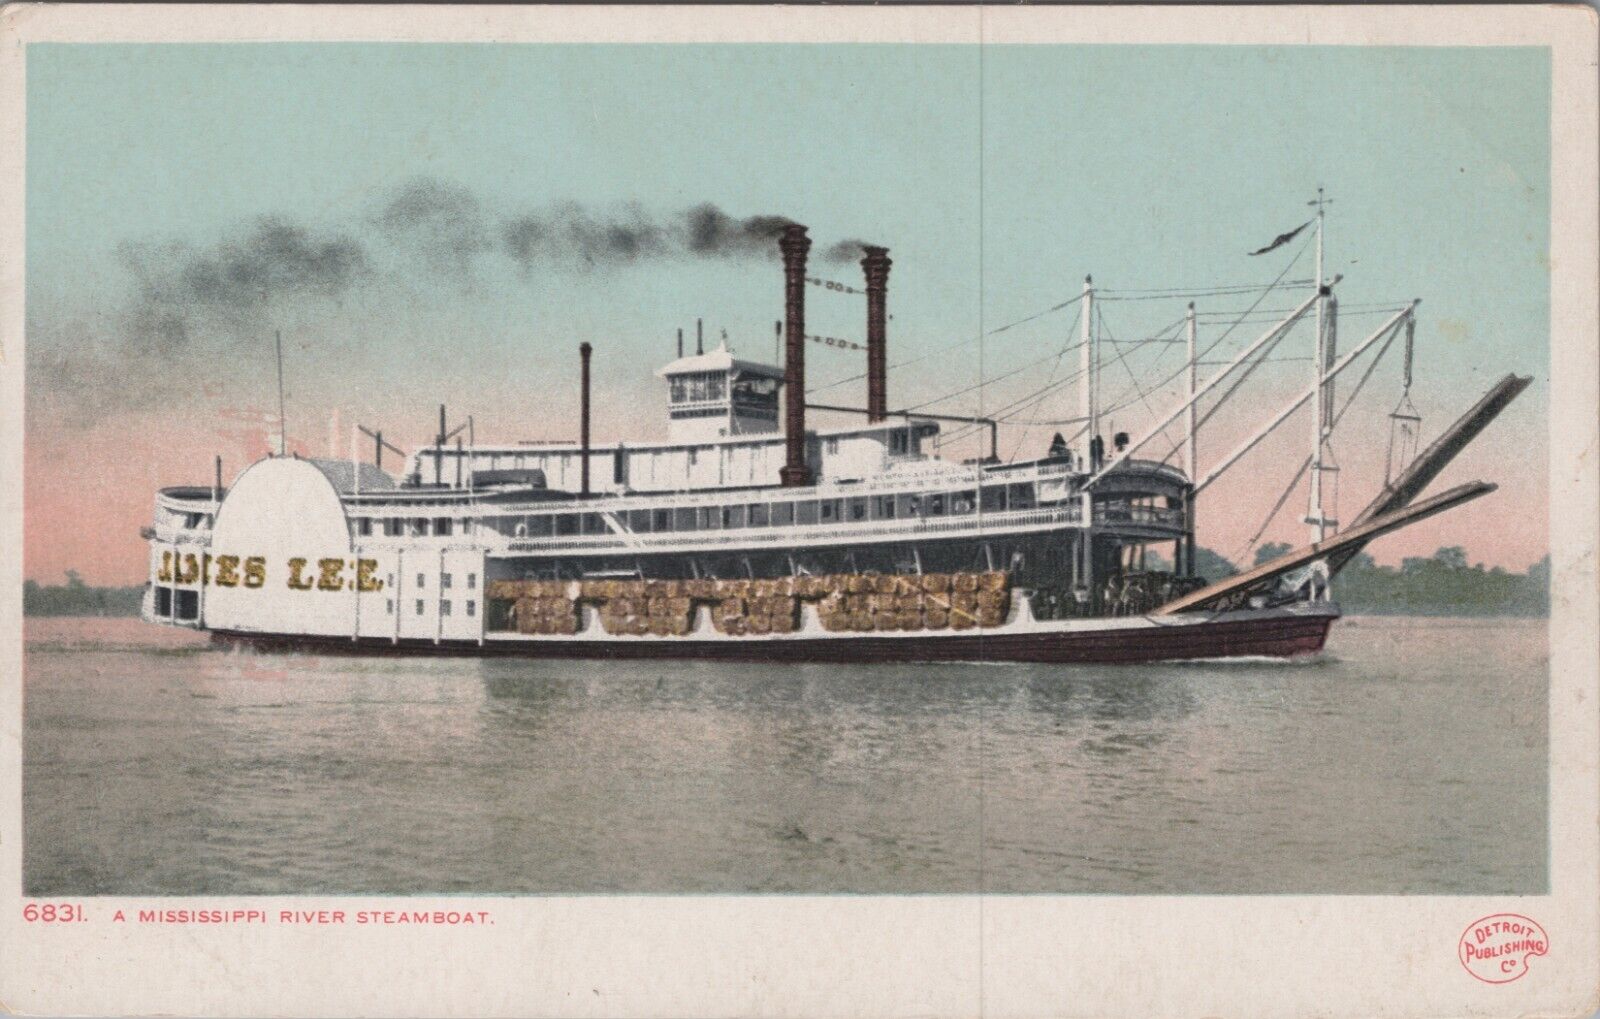 c1905 A Mississippi River Steamboat with Smoke Underway Postcard UNP 4805.3.5